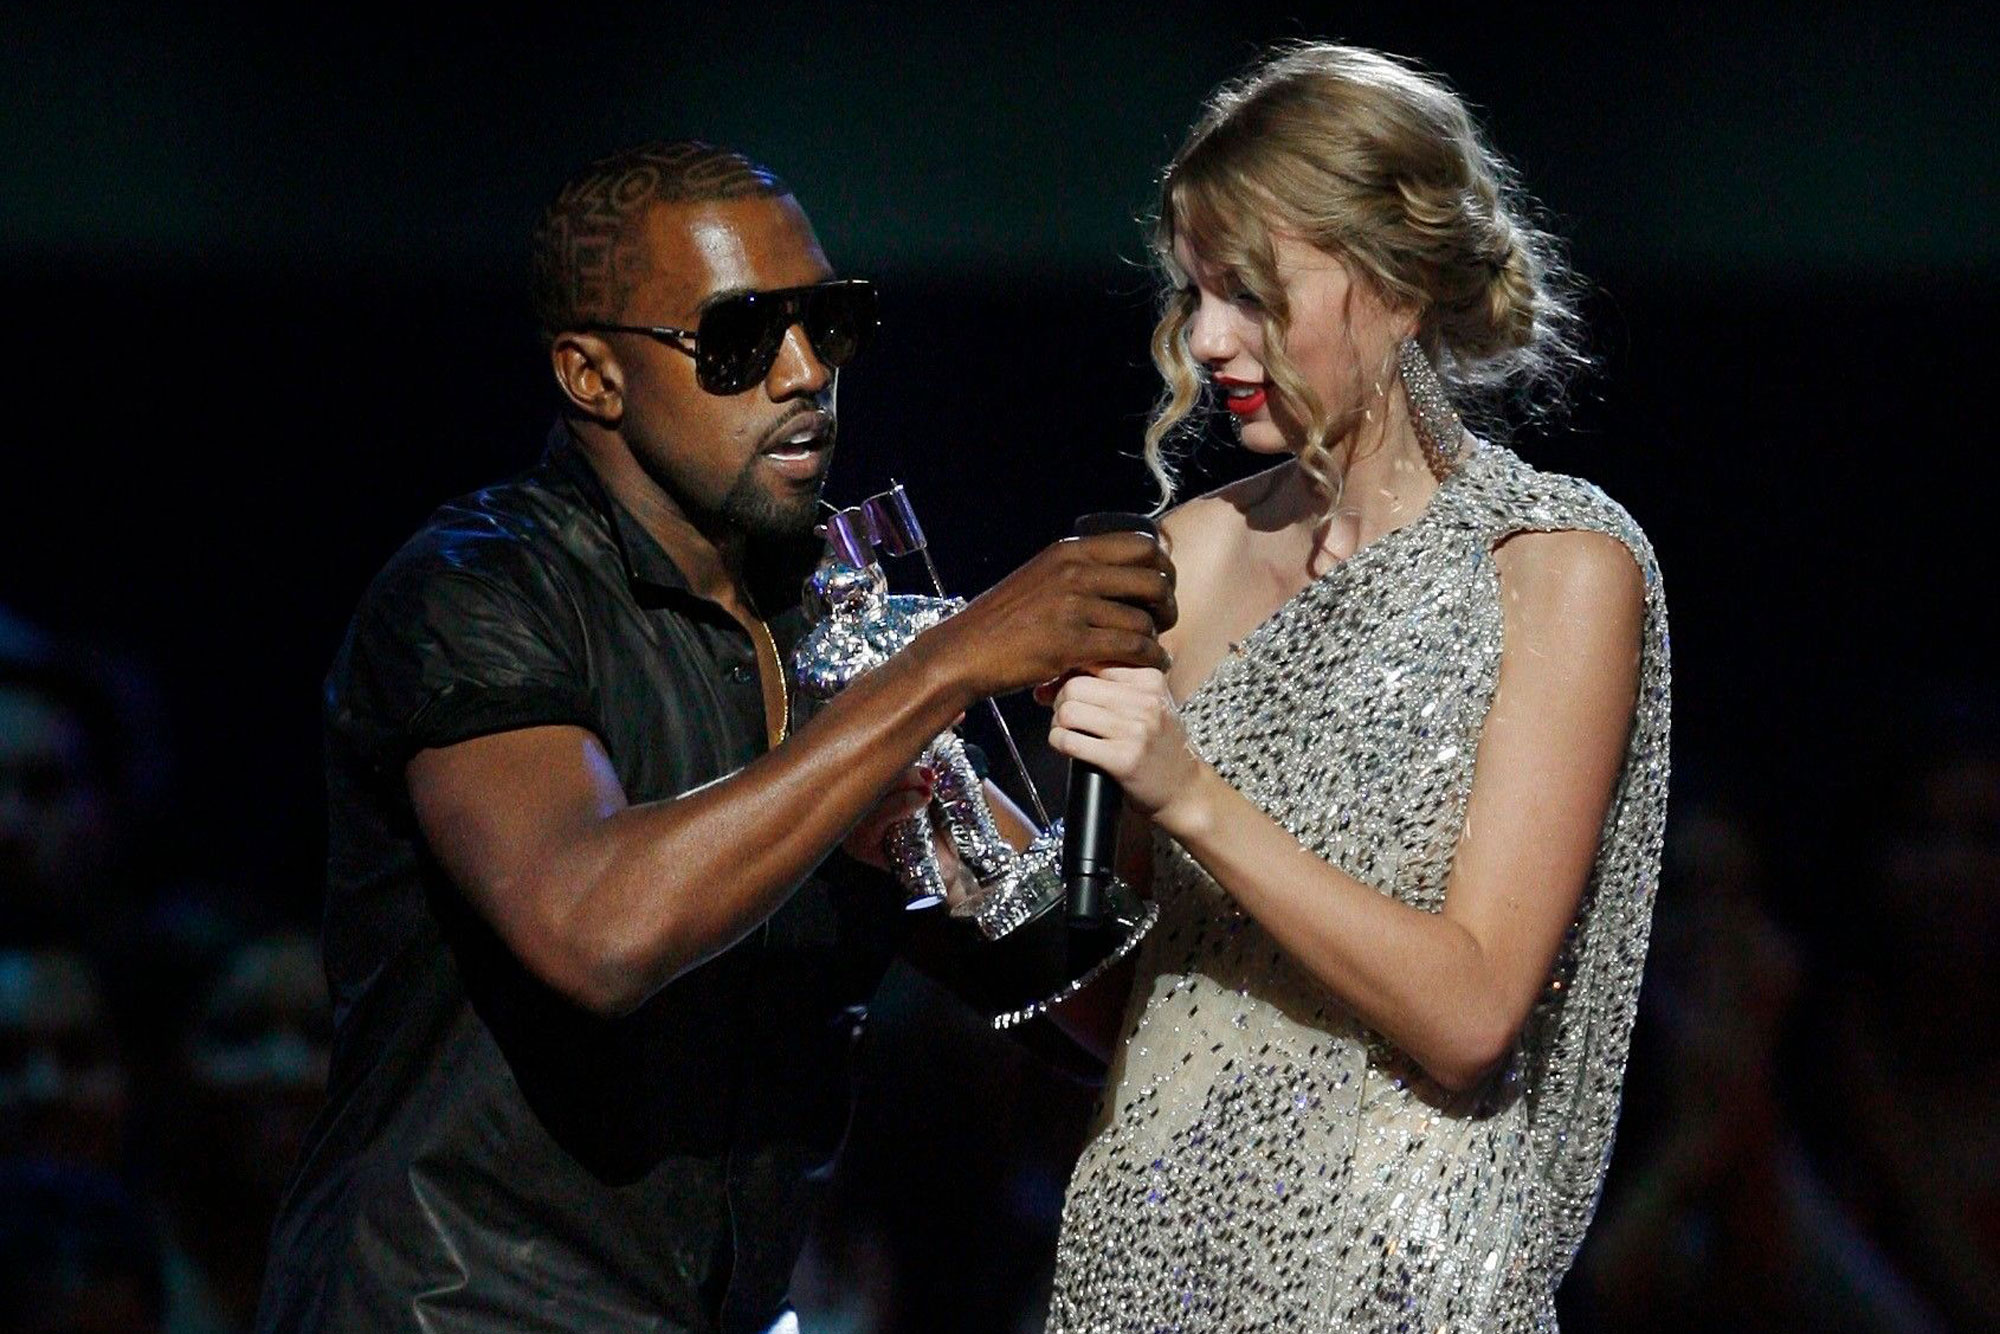 Taylor Swift leaves the stage while handing the mic to Kanye West.